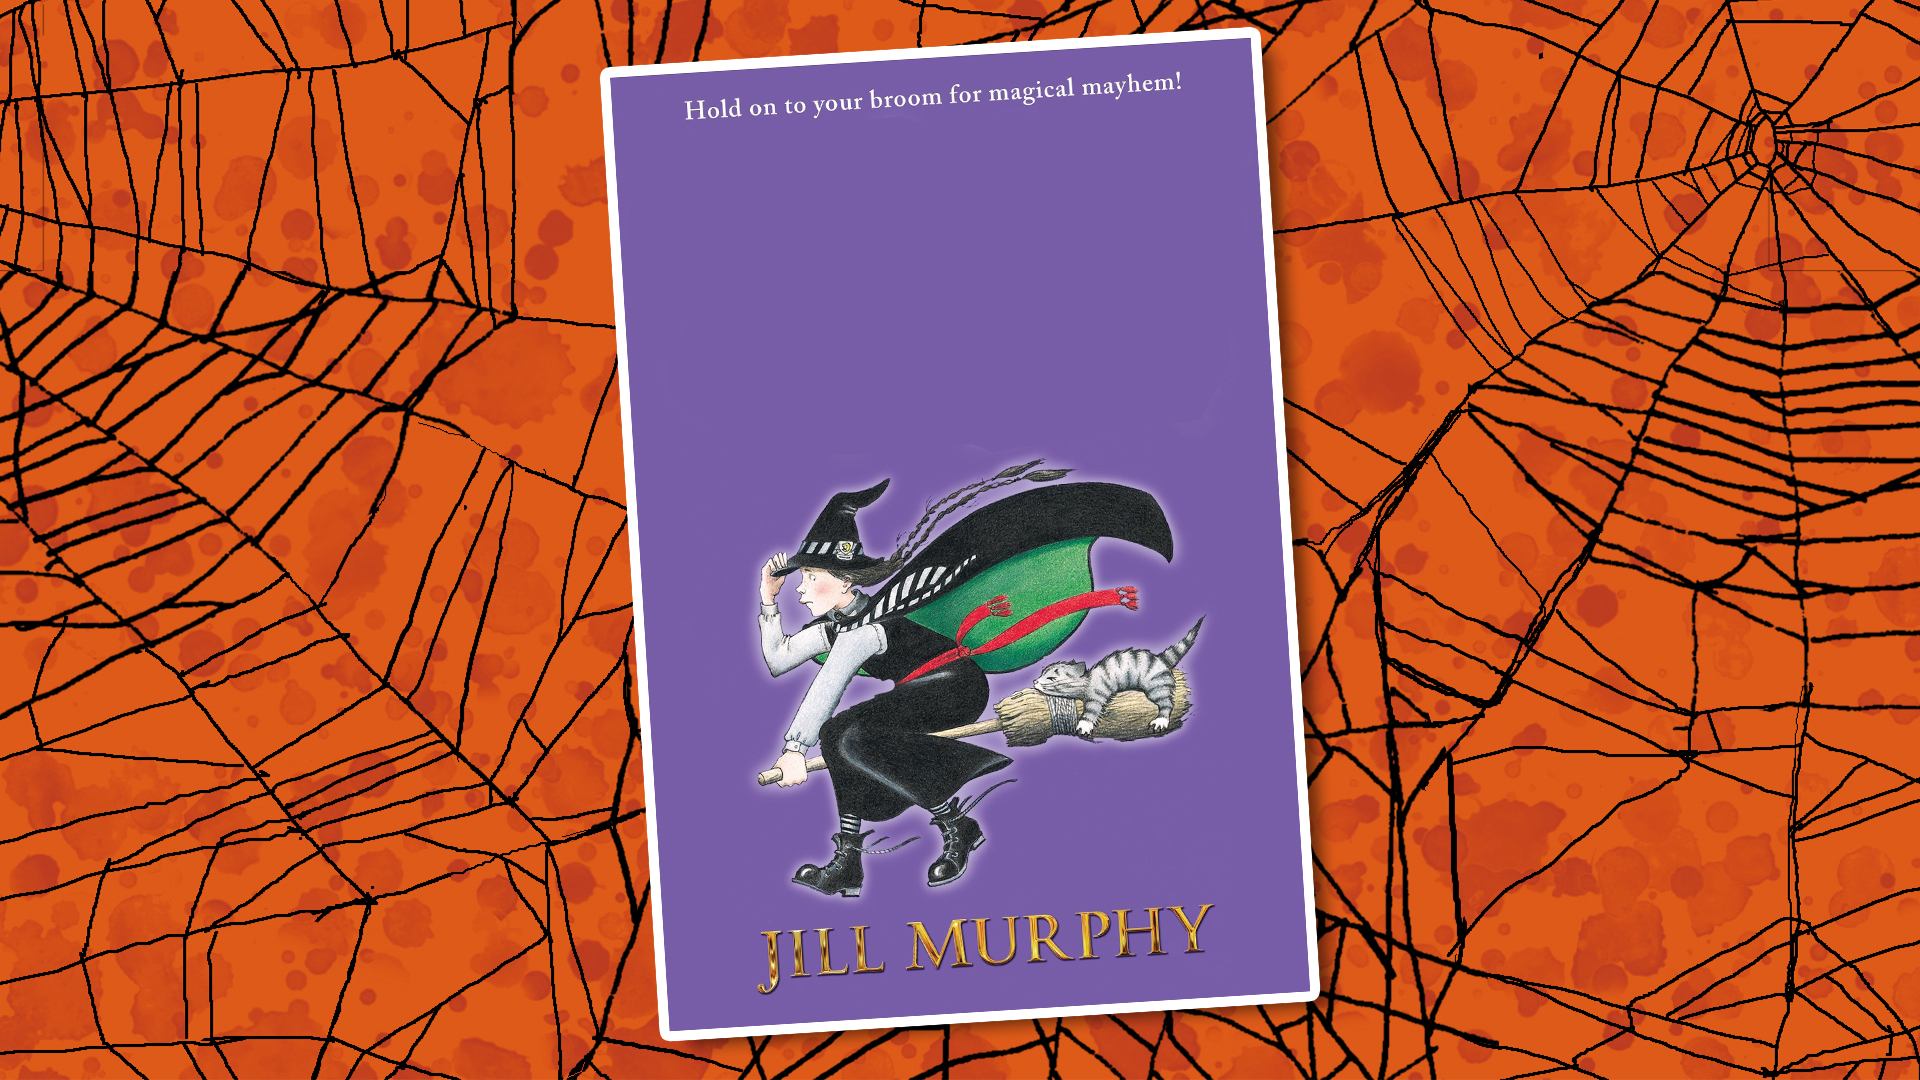 The cover of Jill Murphy's first witch book